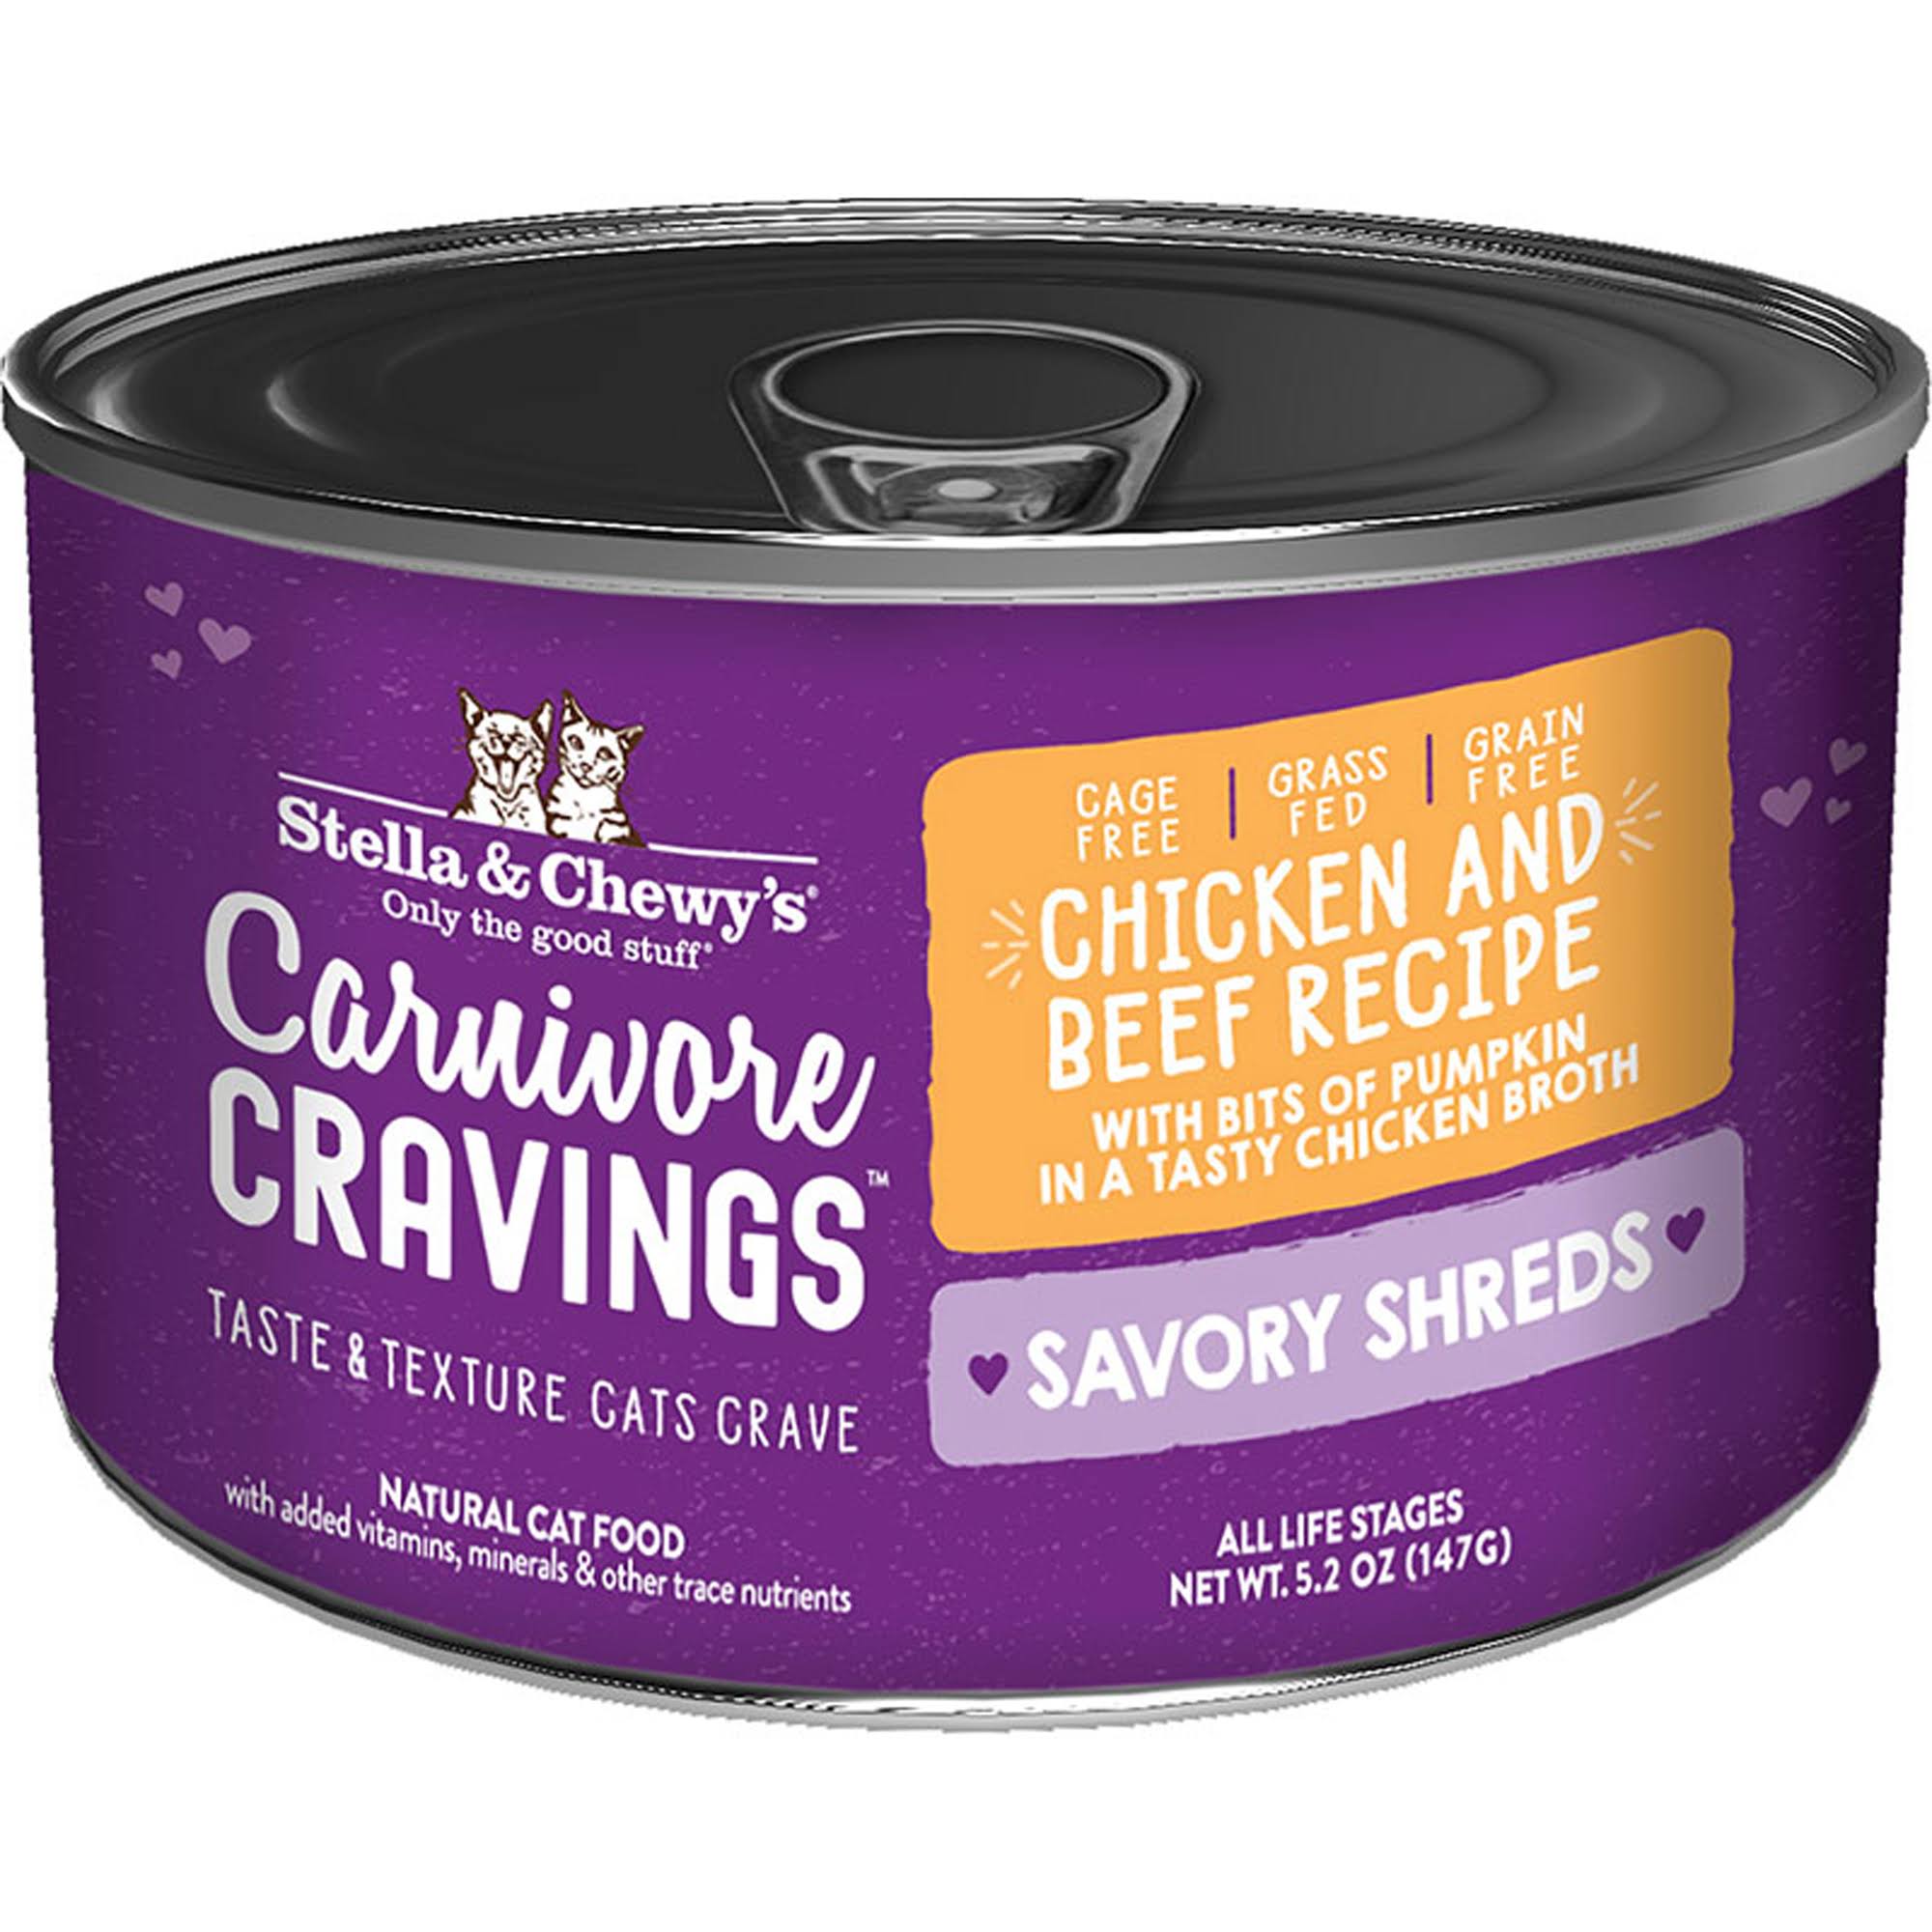 Stella & Chewy's Cat Carnivore Cravings Shred Chicken & Beef - 5.2 oz